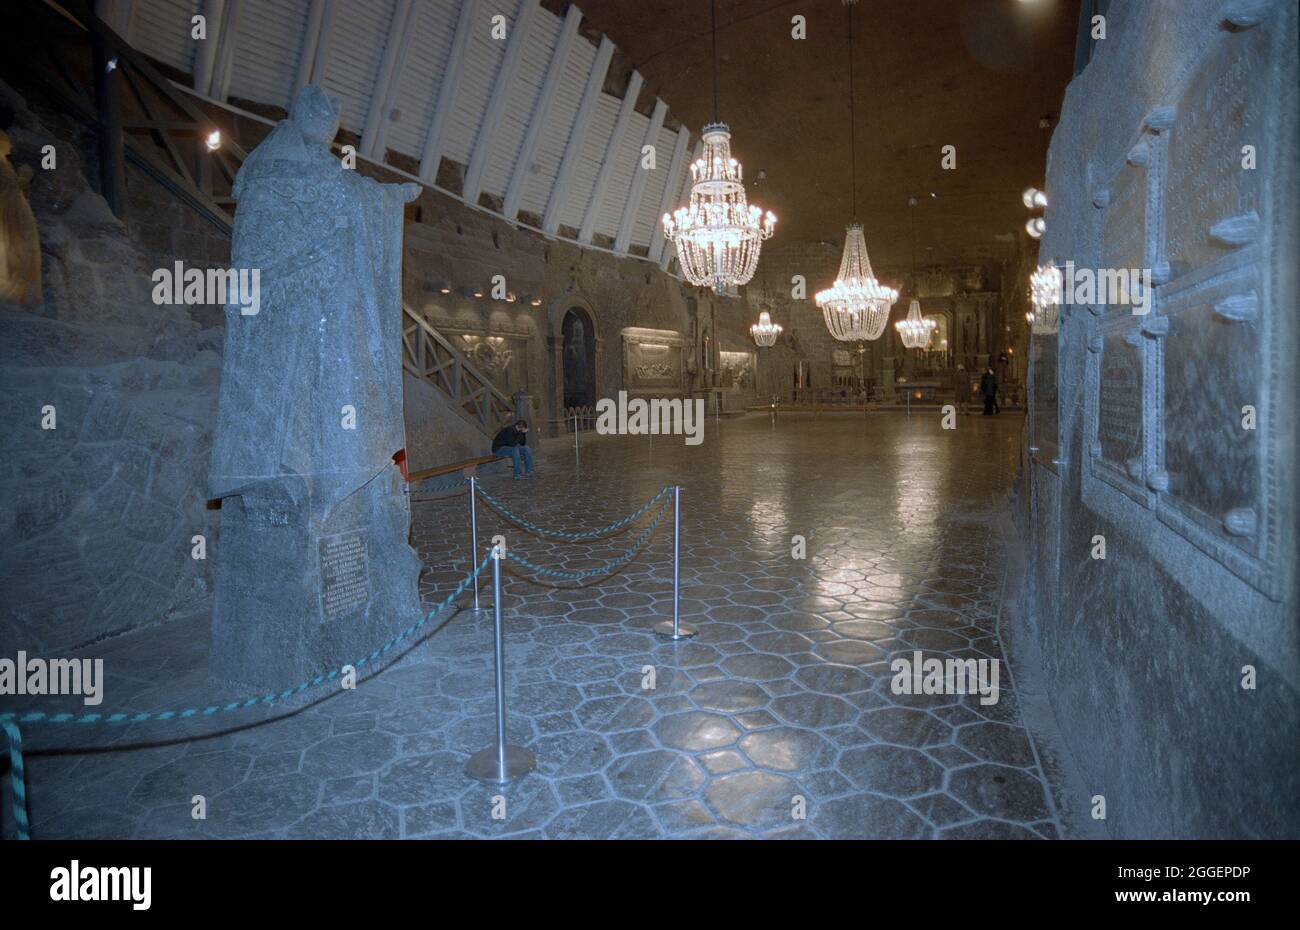 St. Kinga's Chapel in the Wieliczka Salt Mine (Polish: Kopalnia soli Wieliczka), in the town of Wieliczka, southern Poland, lies within the Kraków metropolitan area. From Neolithic times, sodium chloride (table salt) was produced there from the upwelling brine. The Wieliczka salt mine, excavated from the 13th century, produced table salt continuously until 2007, as one of the world's oldest operating salt mines. Throughout its history, the royal salt mine was operated by the Żupy Krakowskie (Kraków Salt Mines) company. Due to falling salt prices and mine flooding, salt mining was discontinued Stock Photo